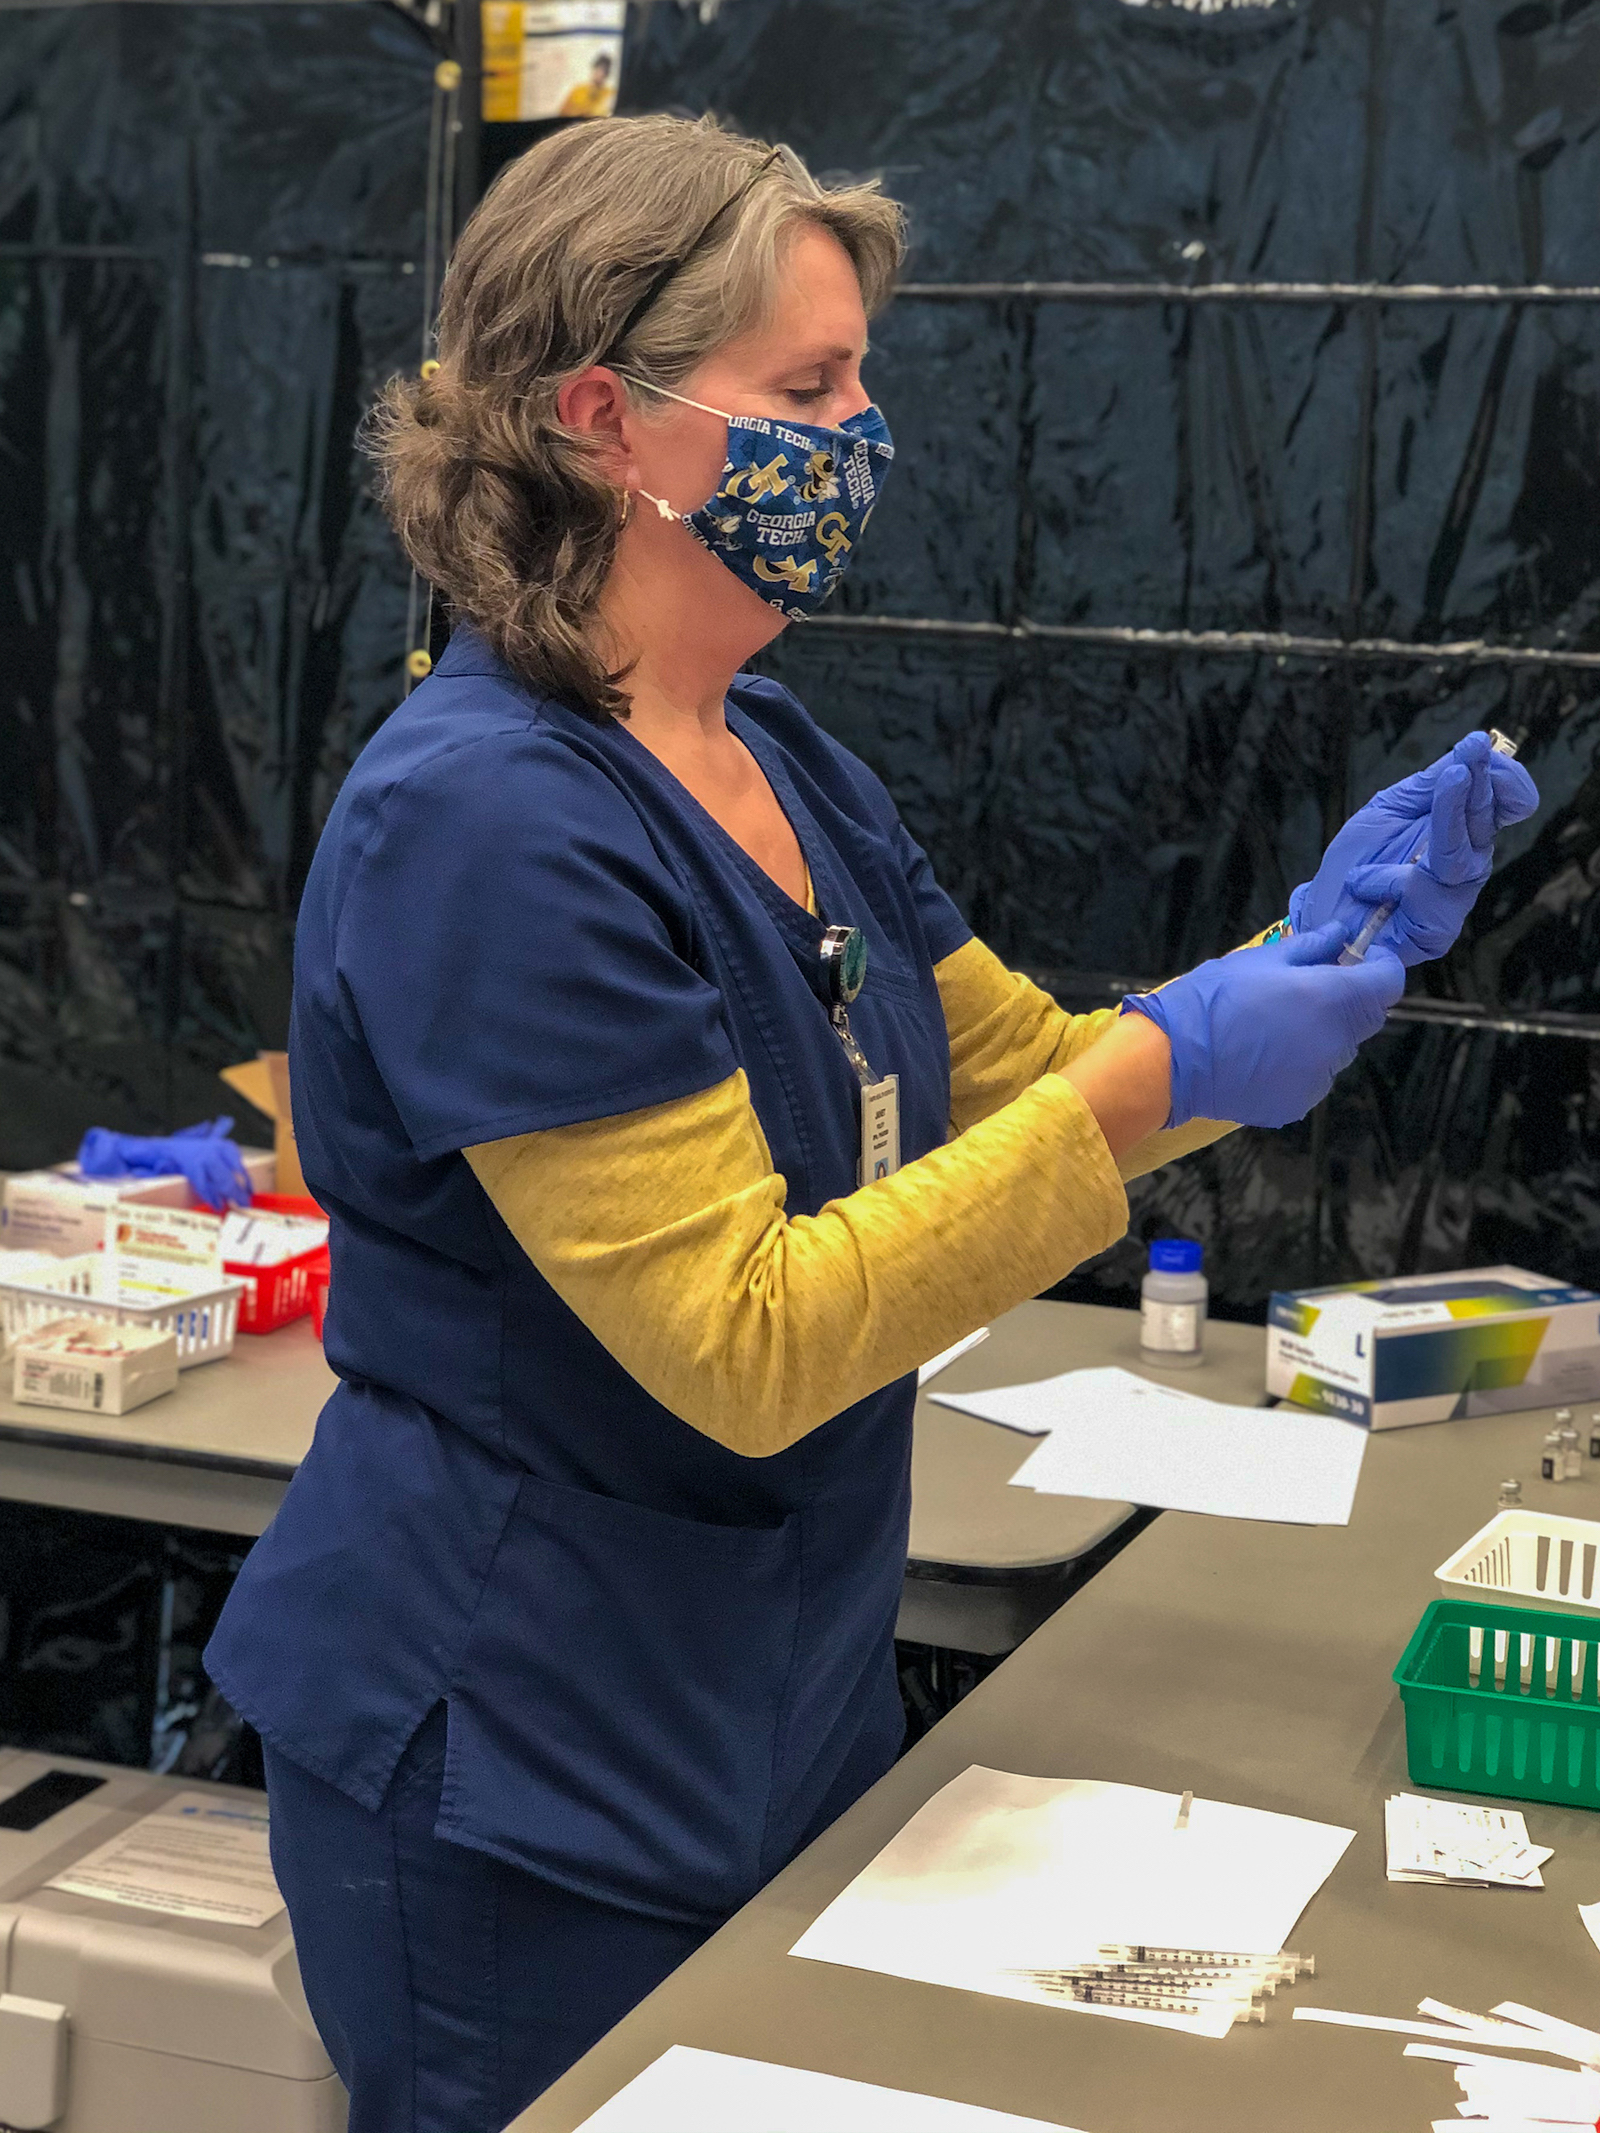 Janet Foley, a pharmacist with Stamps Health Services, is working at the Covid-19 vaccine distribution clinic in the Exhibition Hall. (Photo by Evan Atkinson)